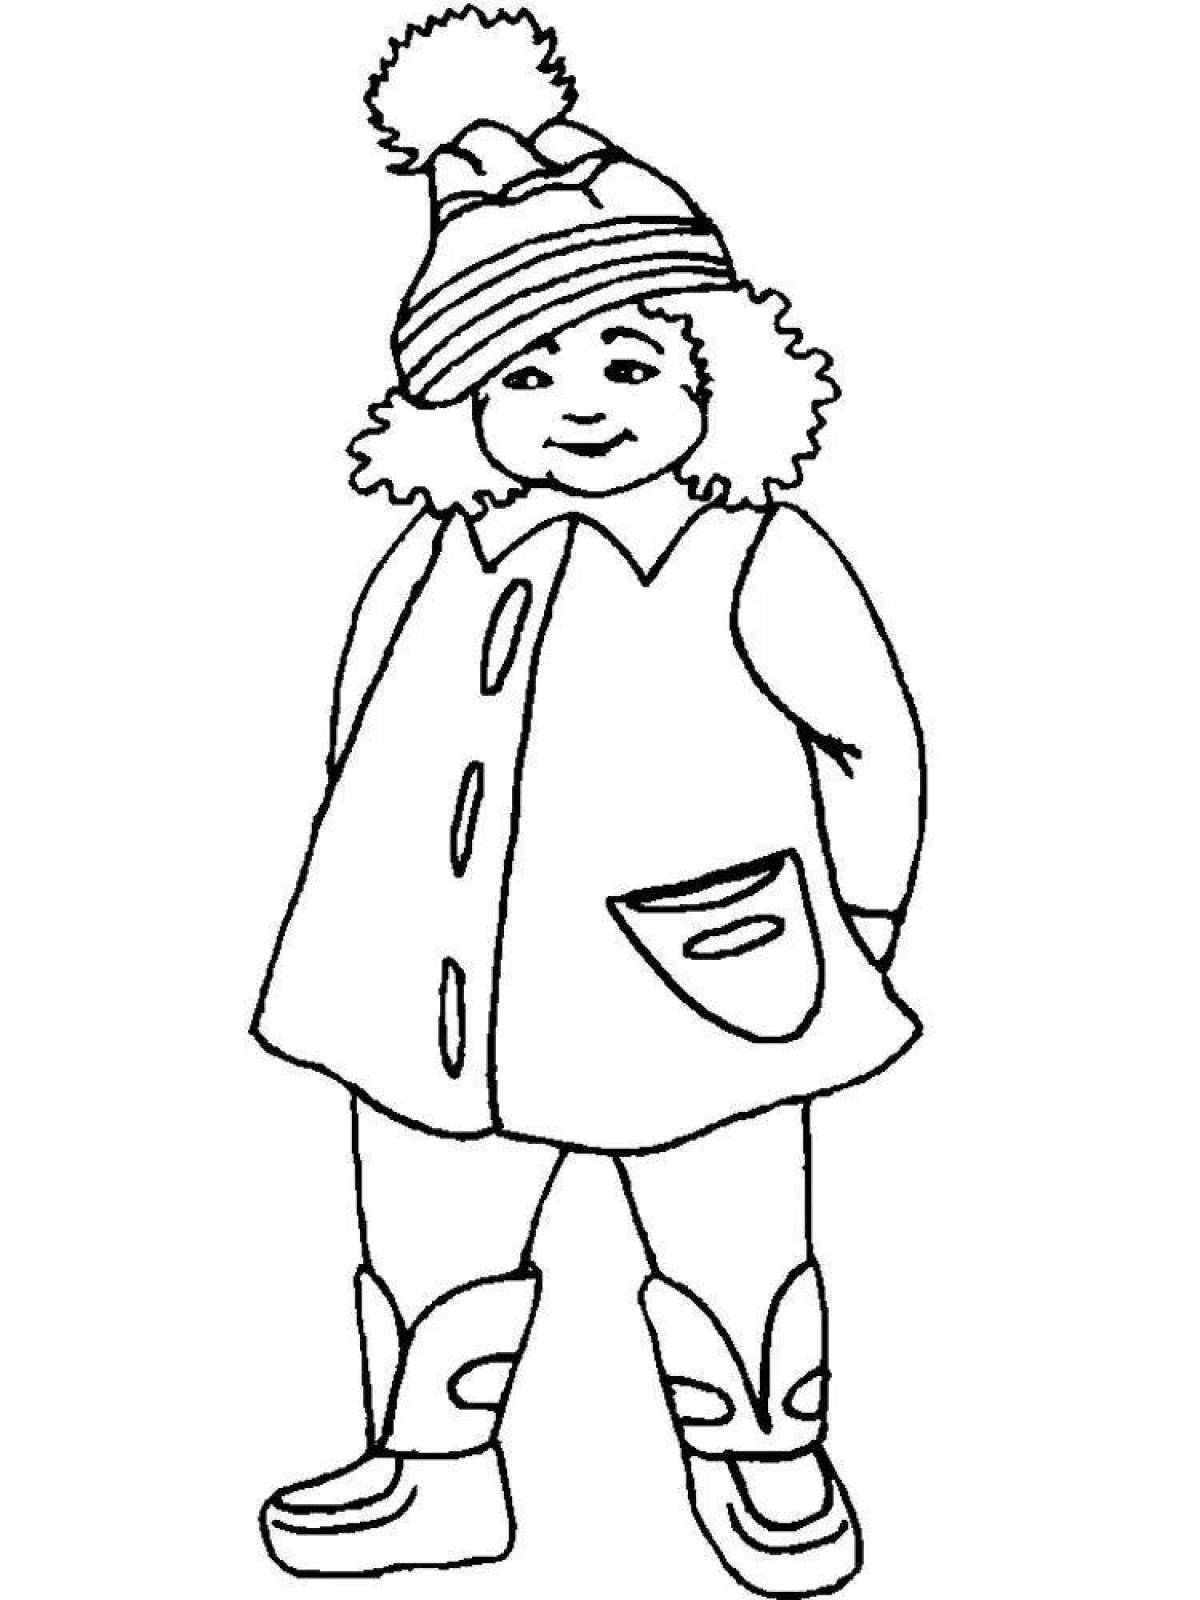 A giggling child in winter clothes